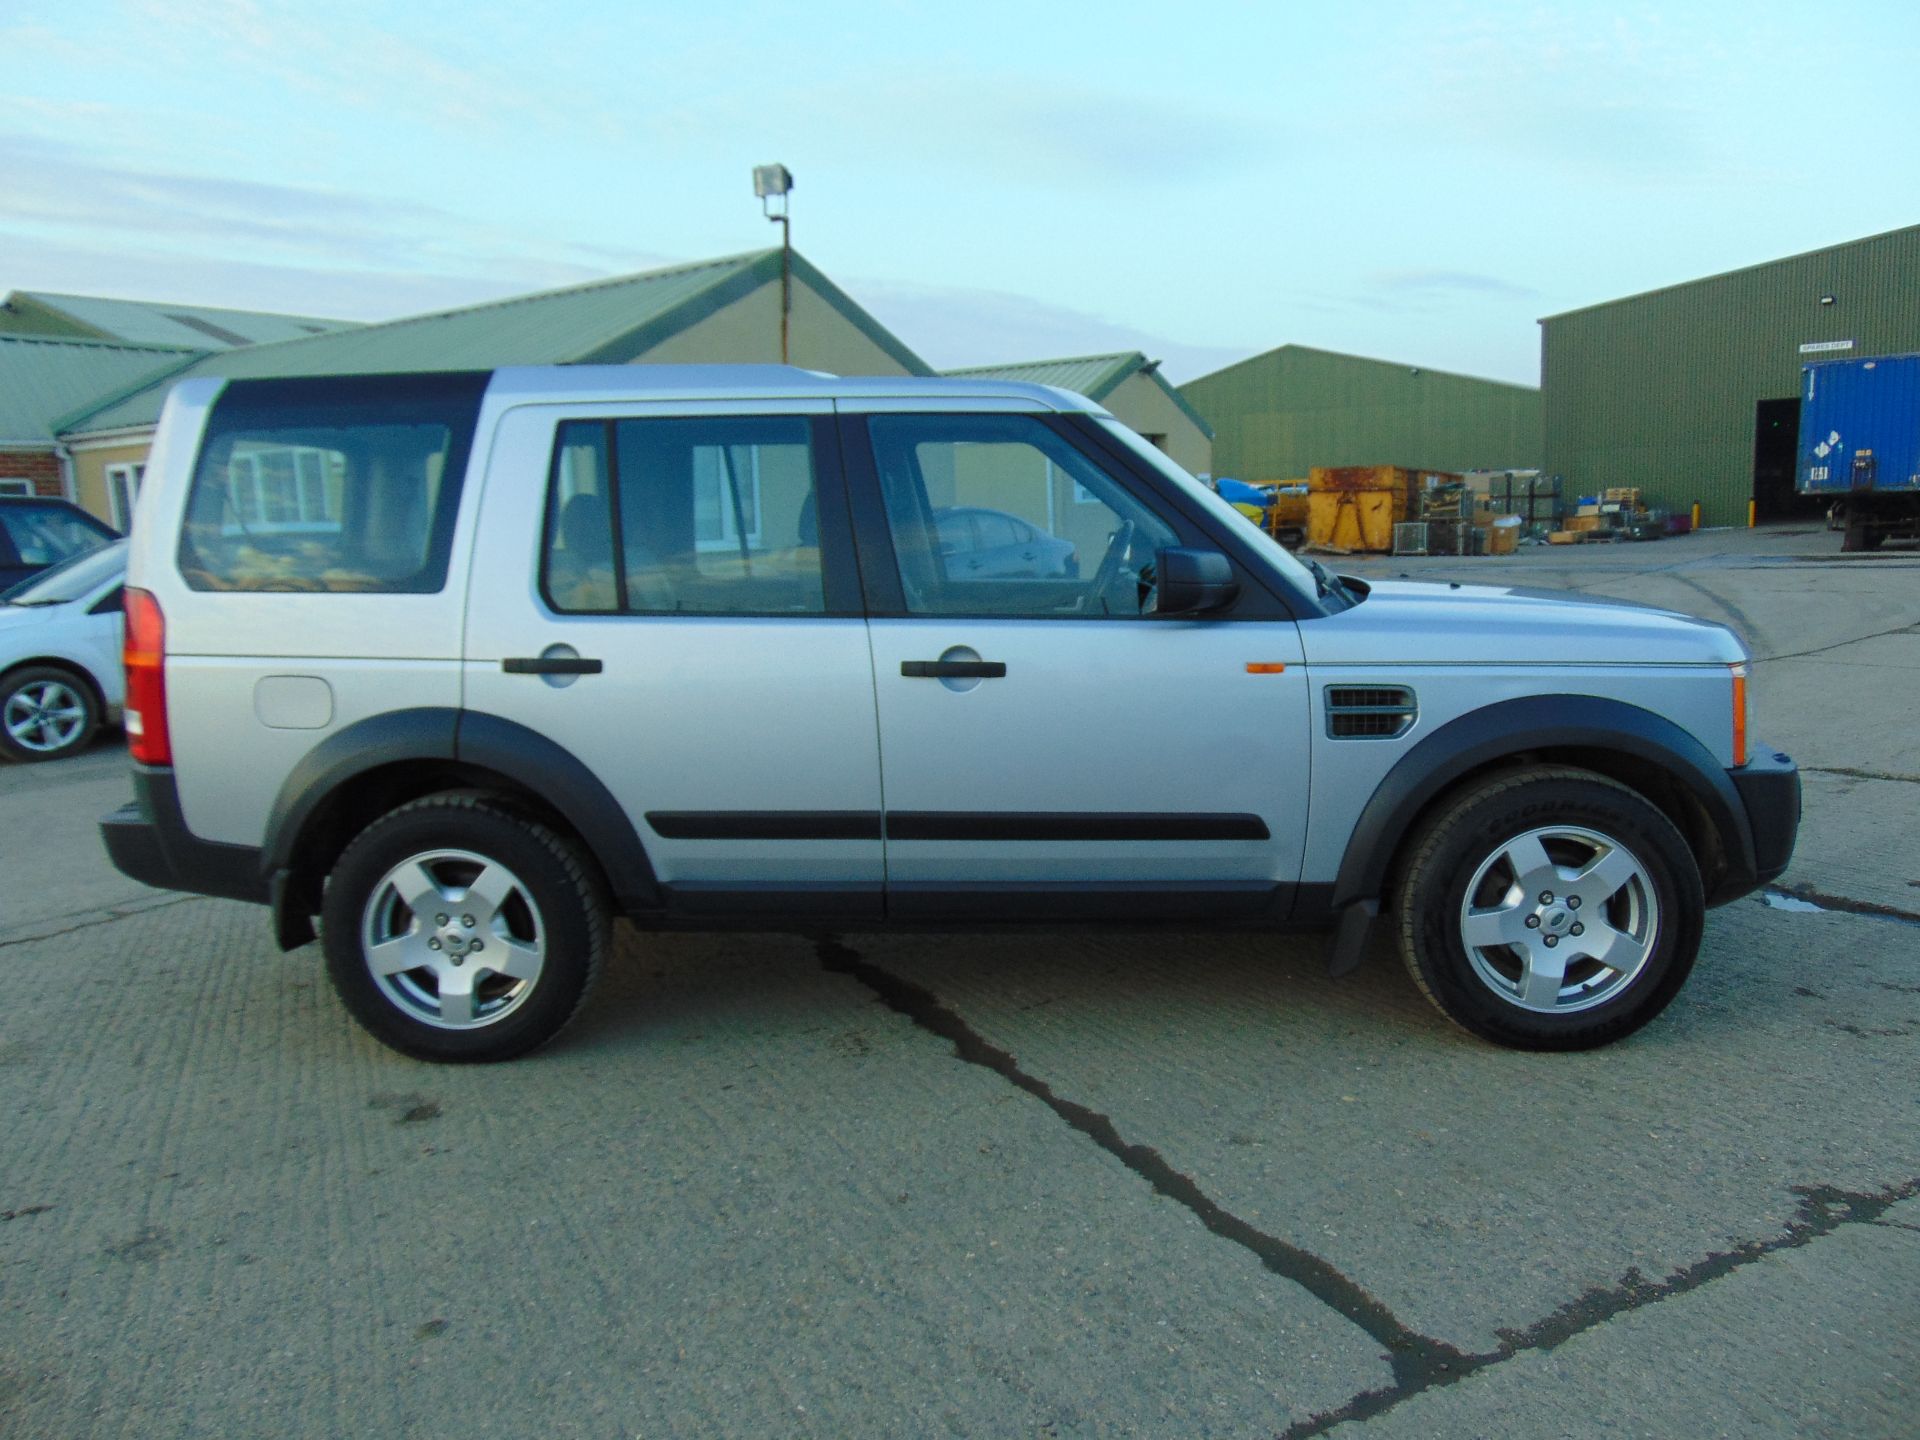 2006 Land Rover Discovery 3 2.7 TDV6 S Auto - Image 6 of 21